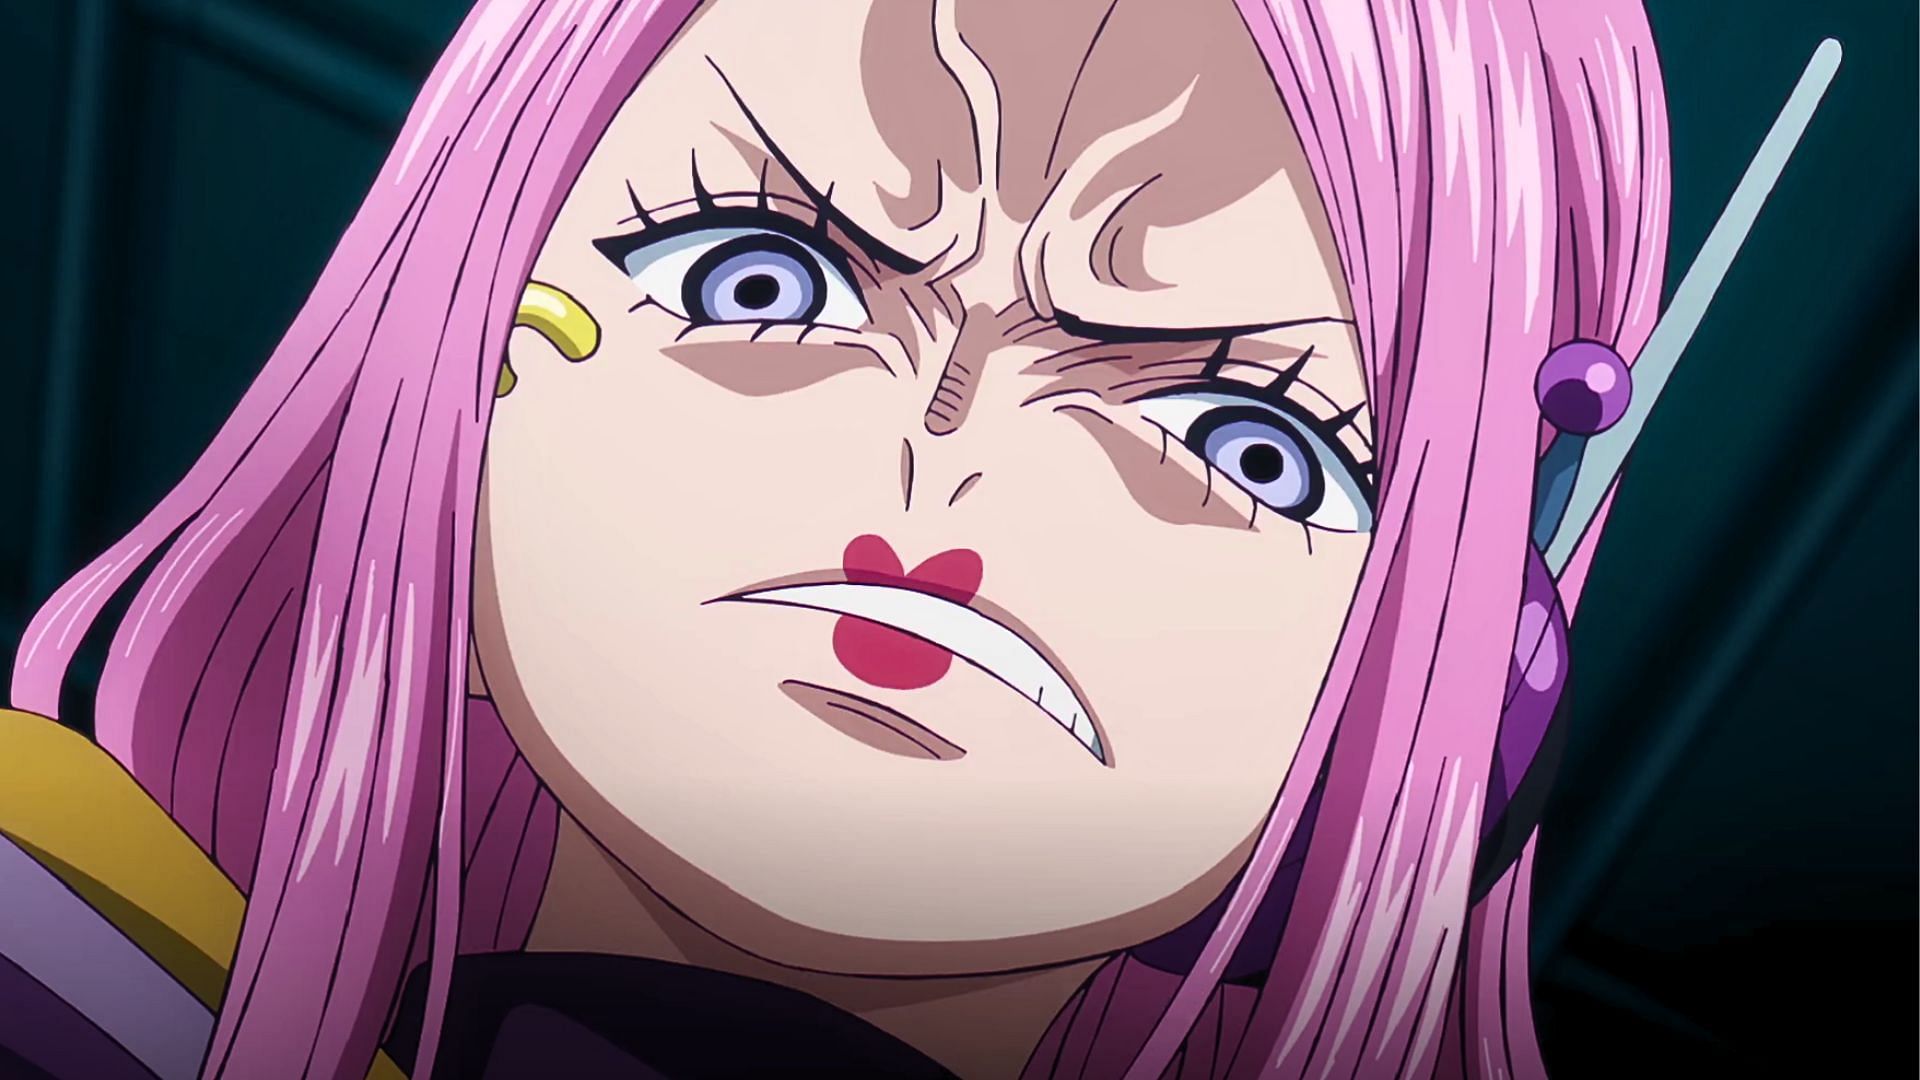 Jewelry Bonney as seen in One Piece episode 1103 (Image via Toei Animation)